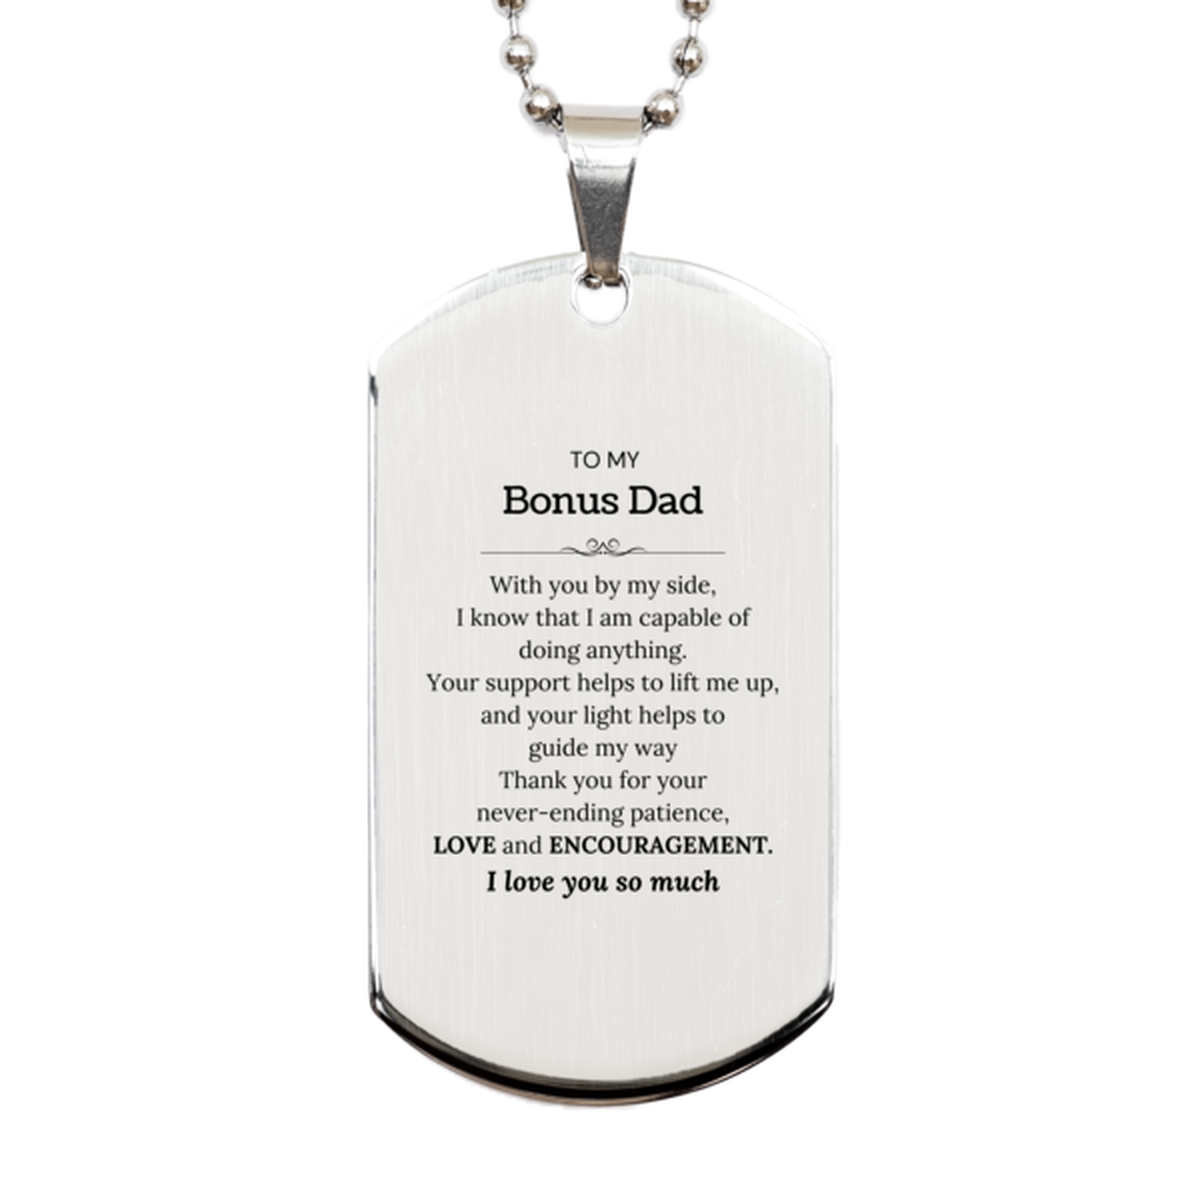 Appreciation Bonus Dad Silver Dog Tag Gifts, To My Bonus Dad Birthday Christmas Wedding Keepsake Gifts for Bonus Dad With you by my side, I know that I am capable of doing anything. I love you so much